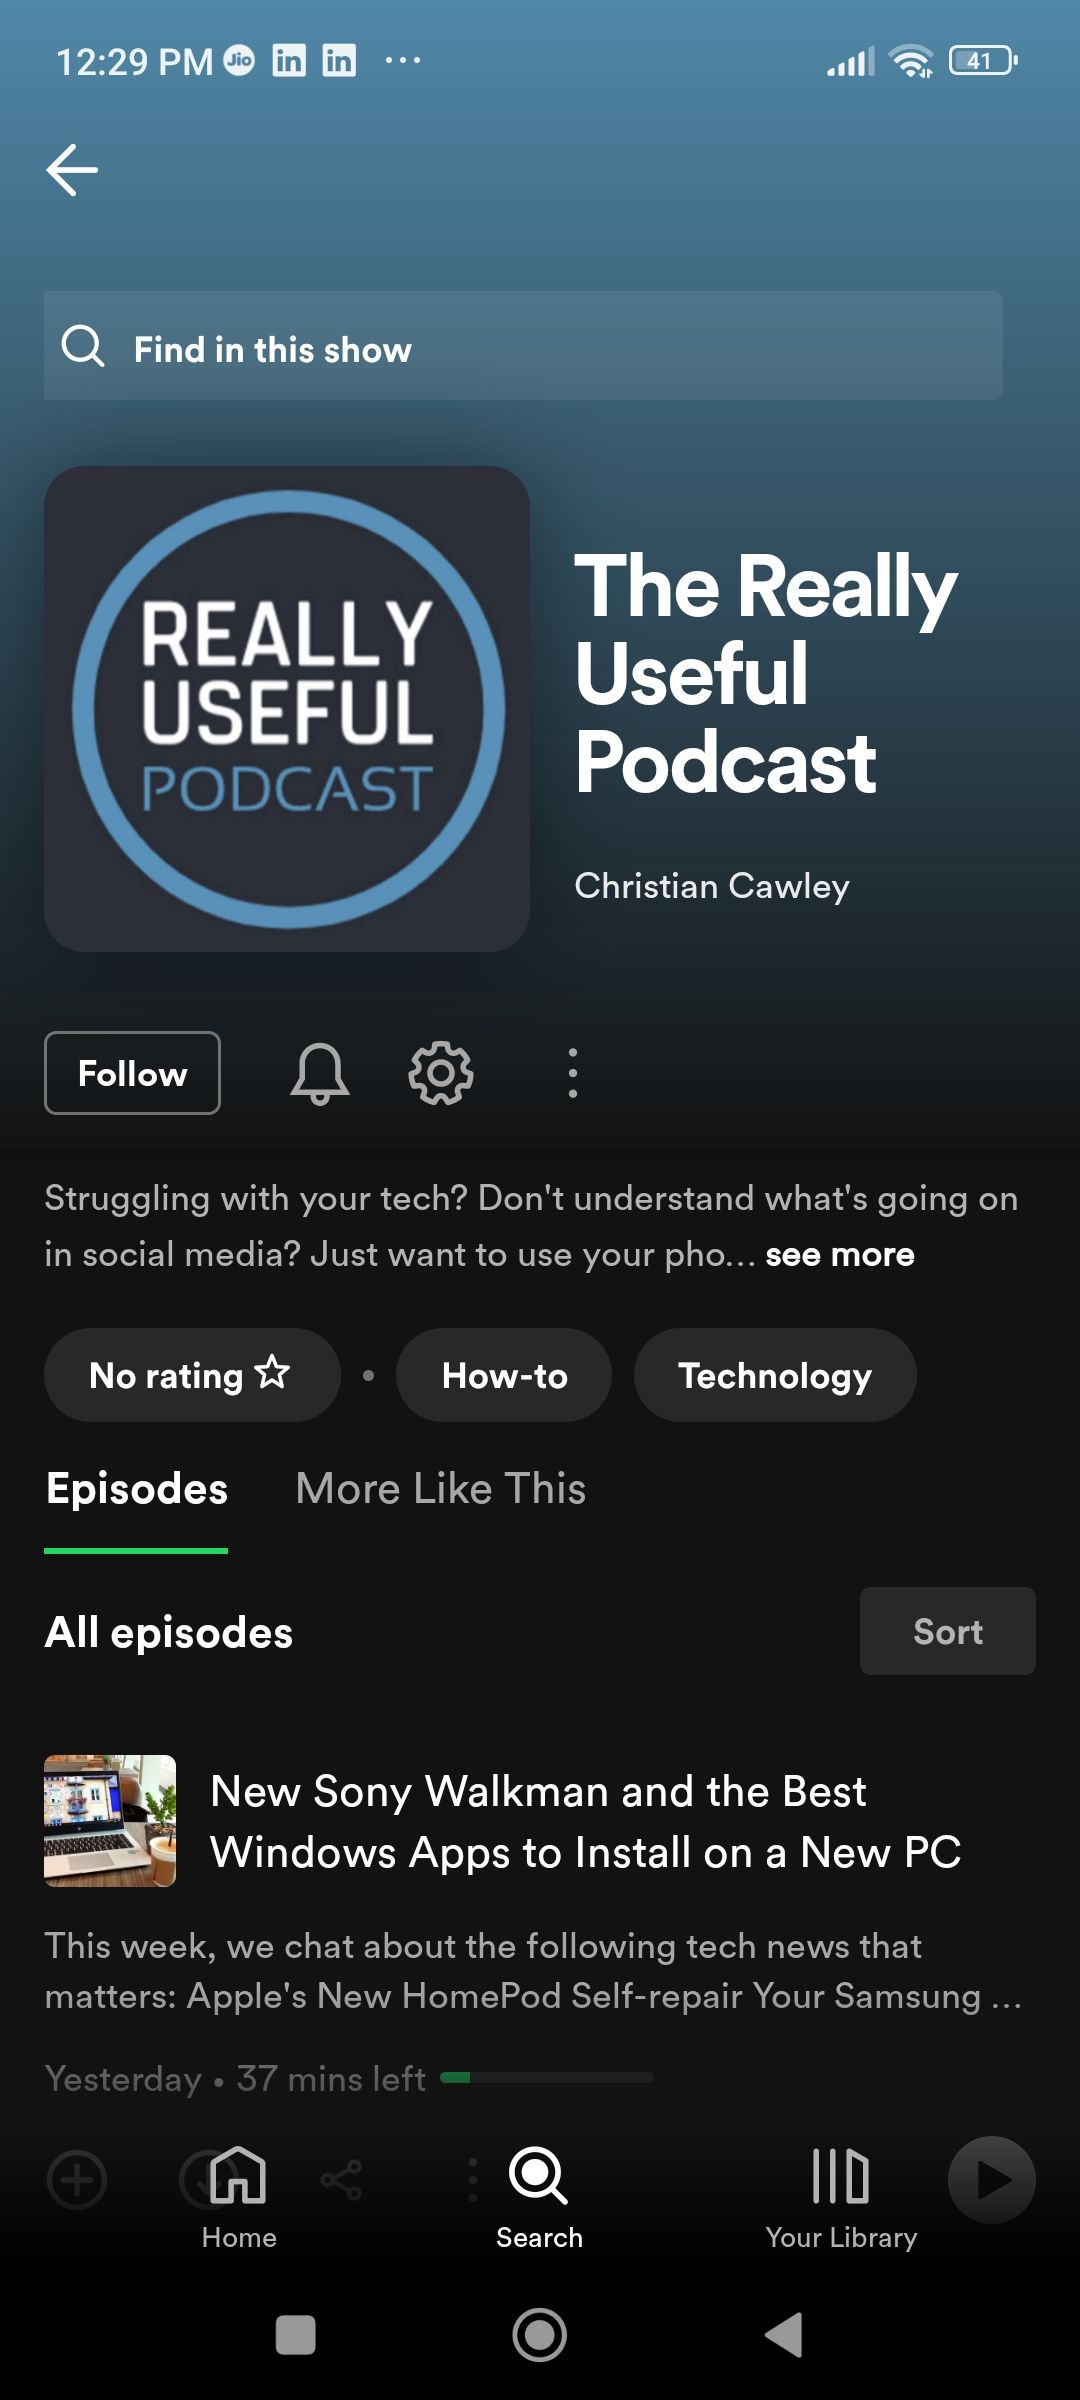 Spotify podcast overview and episodes